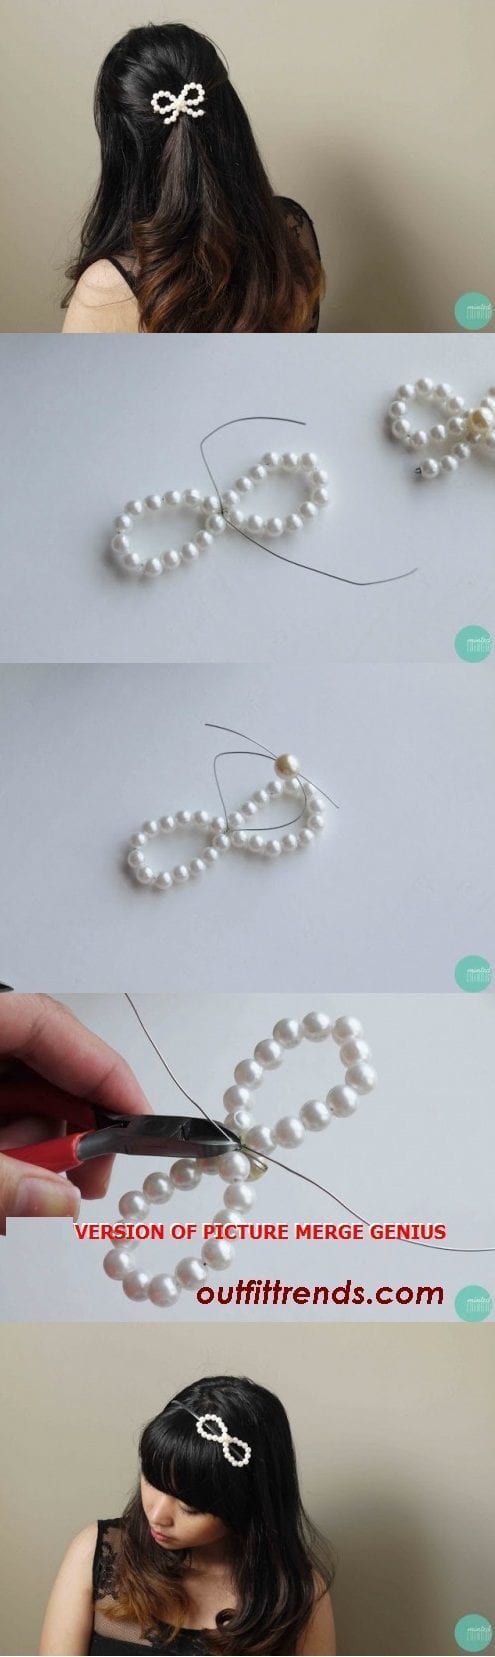 10 Amazing DIY Hair Accessories with Simple Tutorials